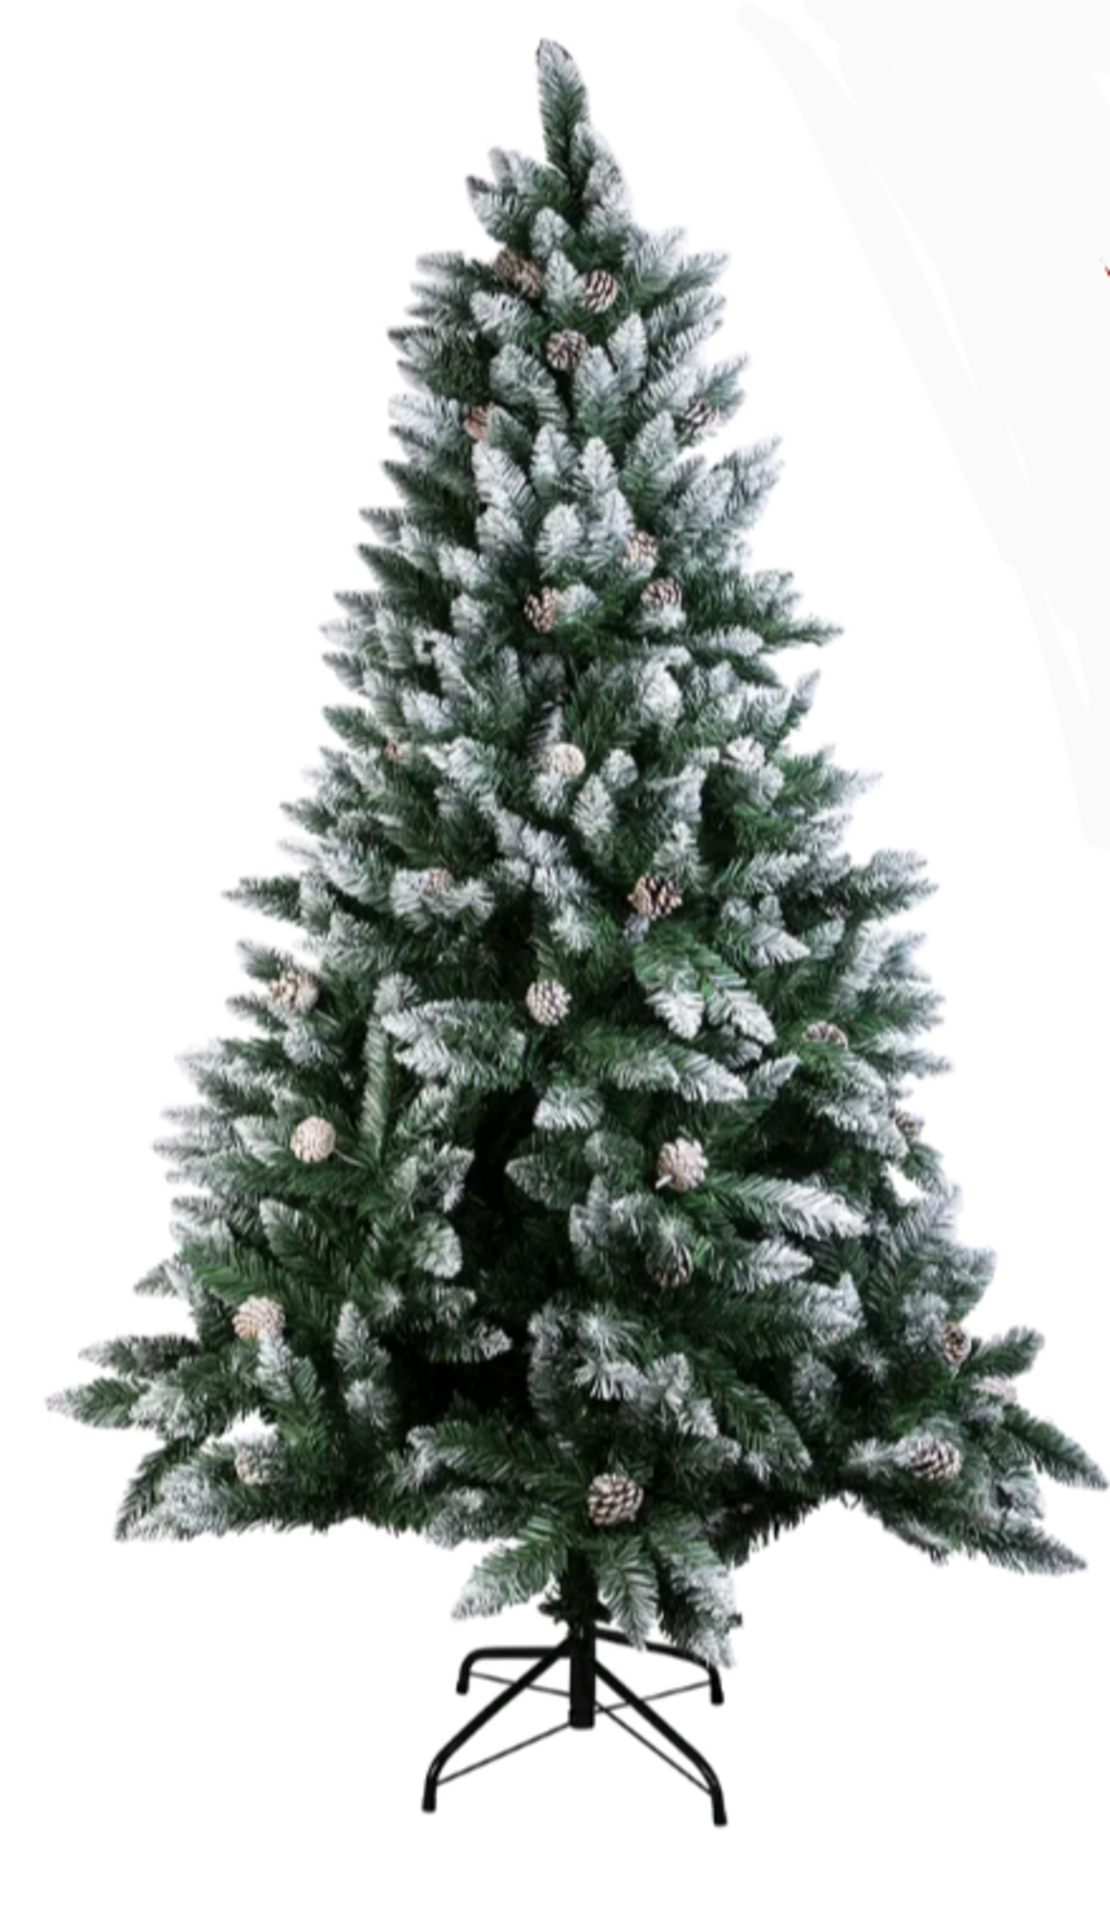 Christmas Trees and Decor *NO VAT* - Image 4 of 6